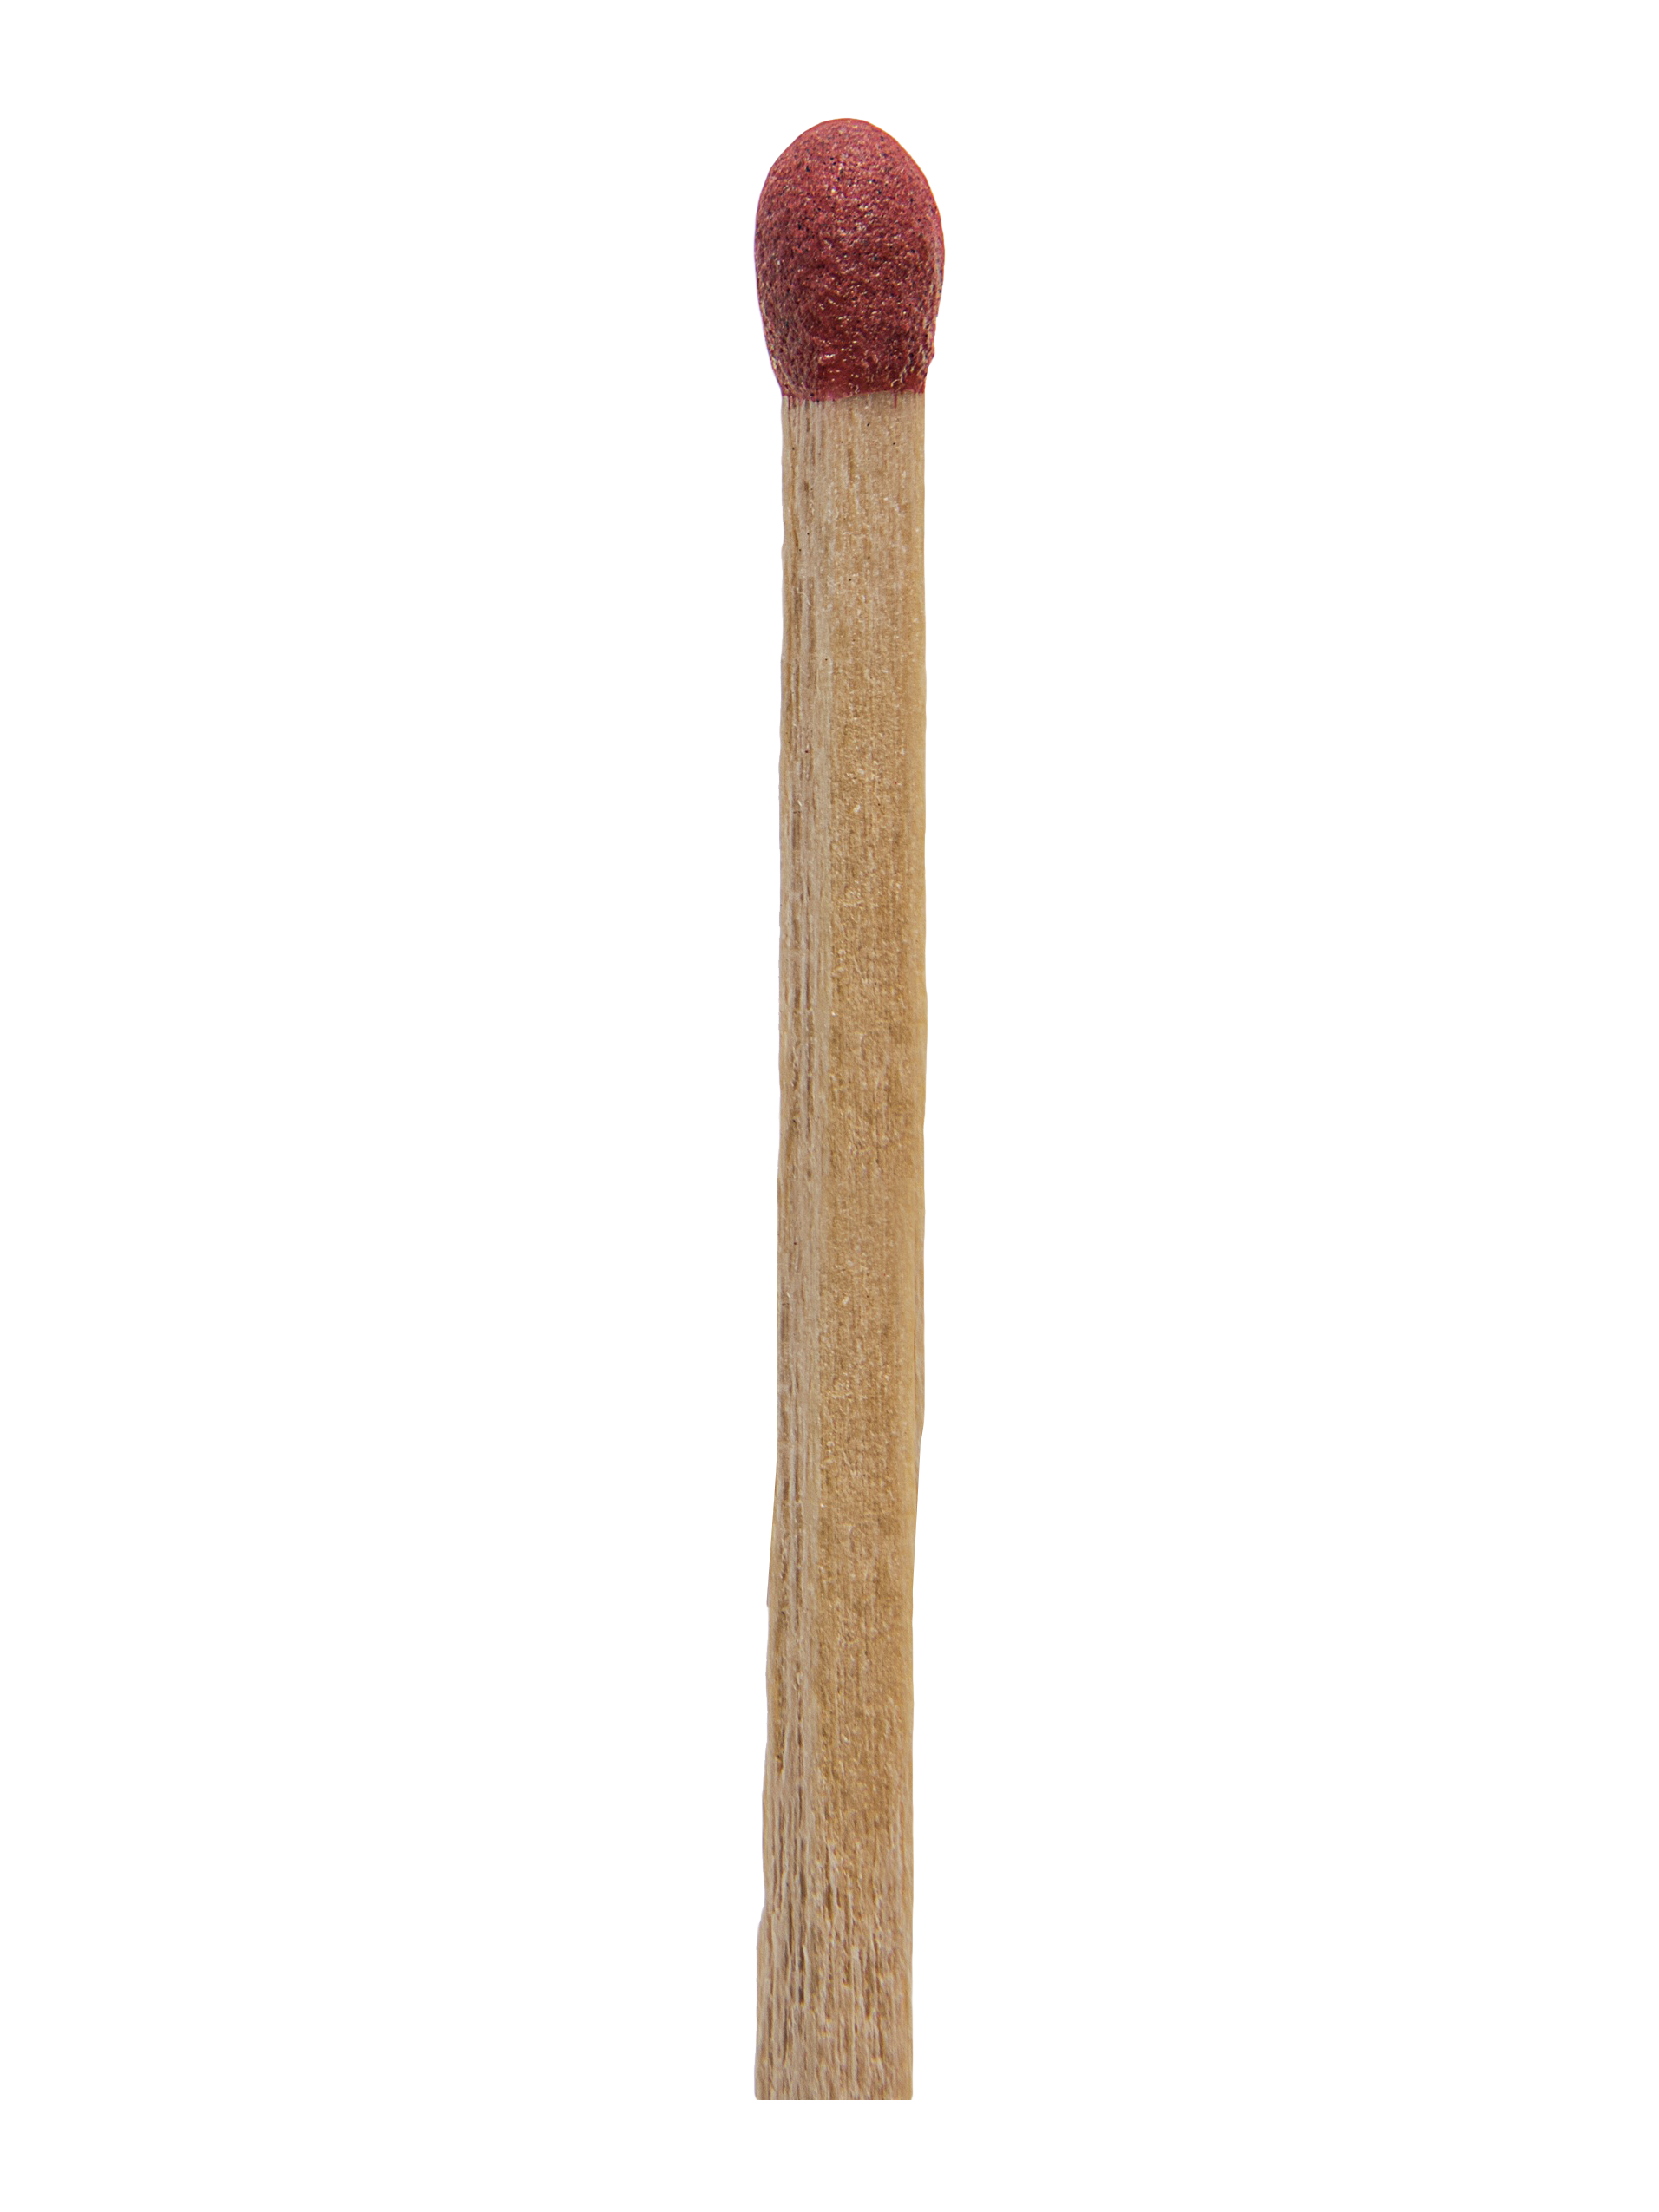 A Match Stick With A Red Tip